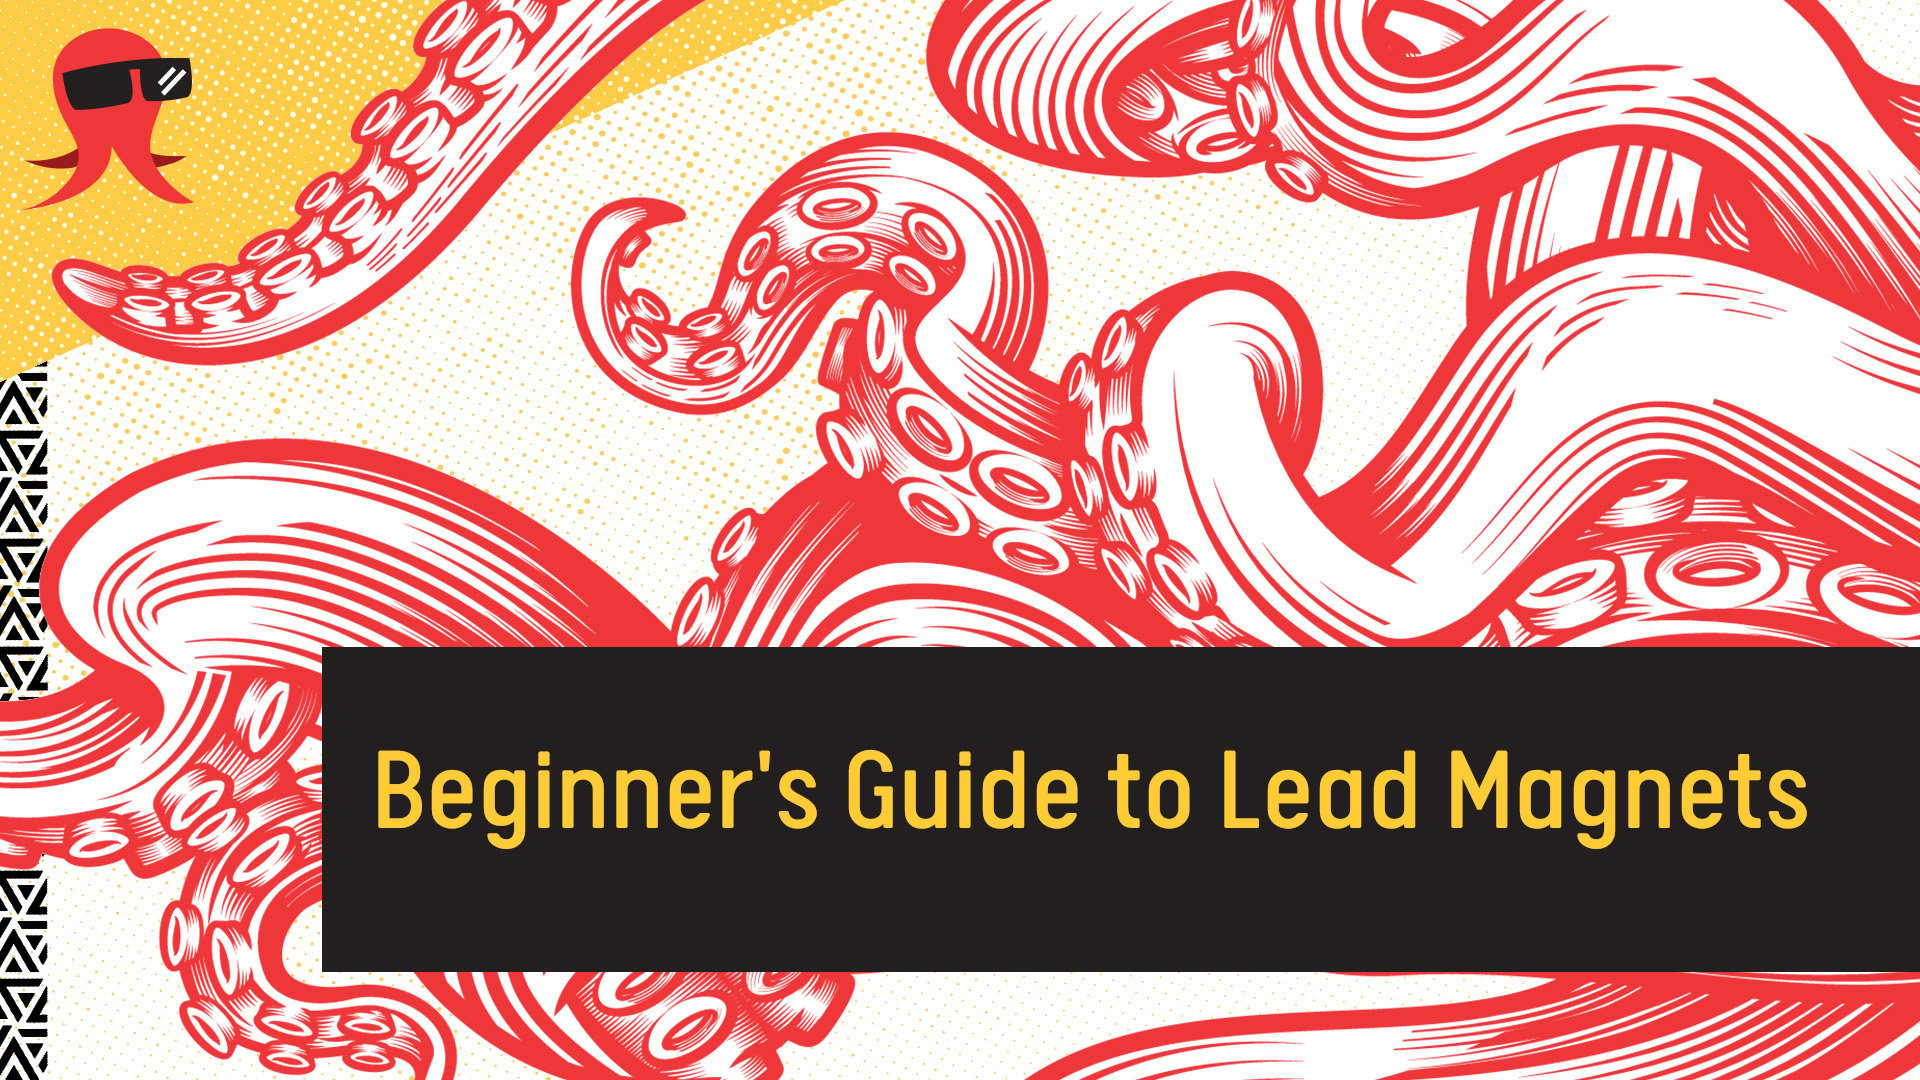 Begginers-Guide-to-Lead-Magnets-Cover-Image-1